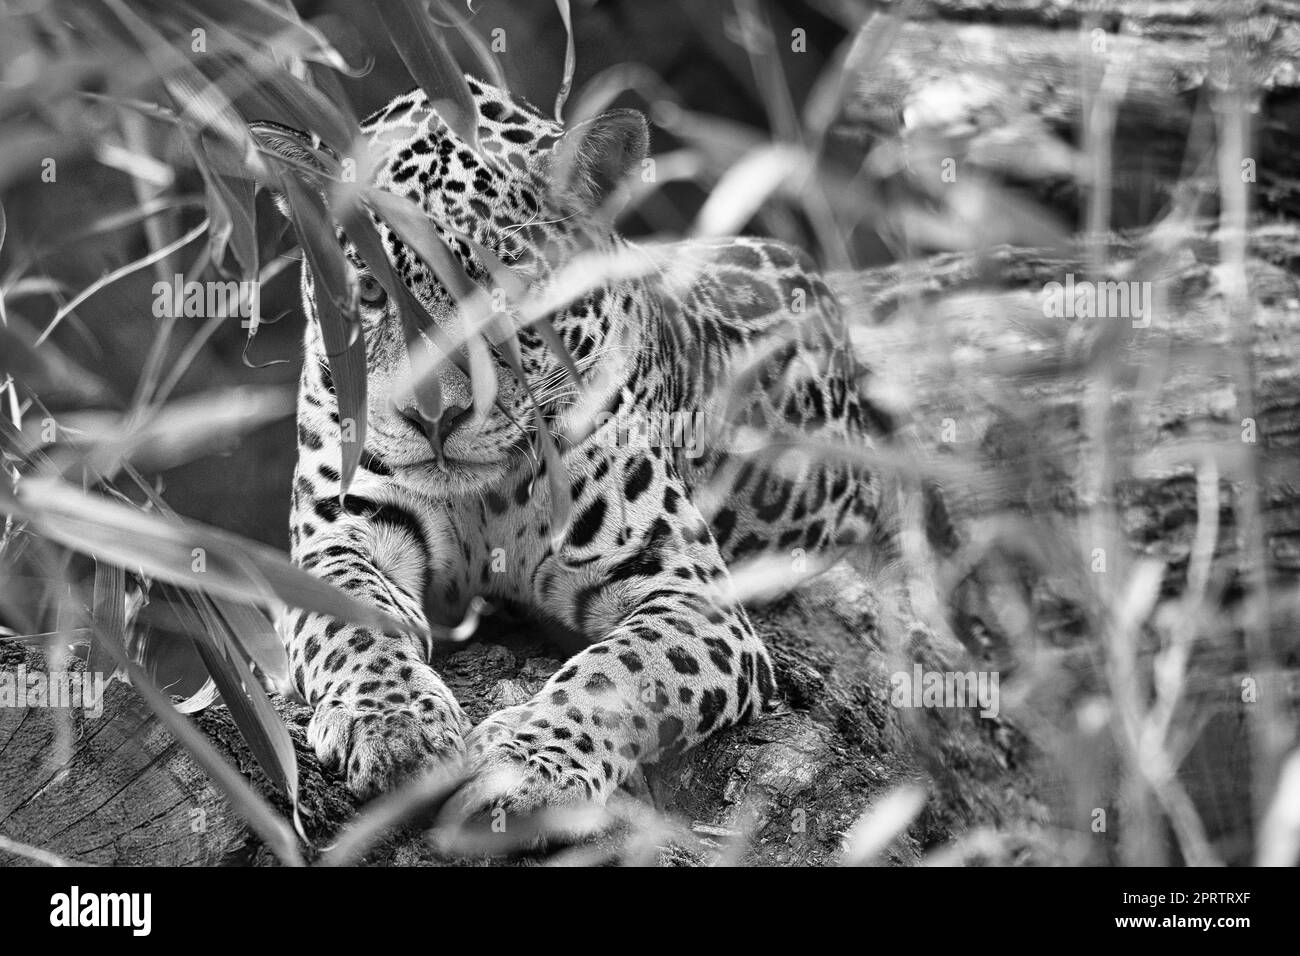 Jaguar in black and white, lying behind grass. spotted fur, camouflaged lurking. Stock Photo